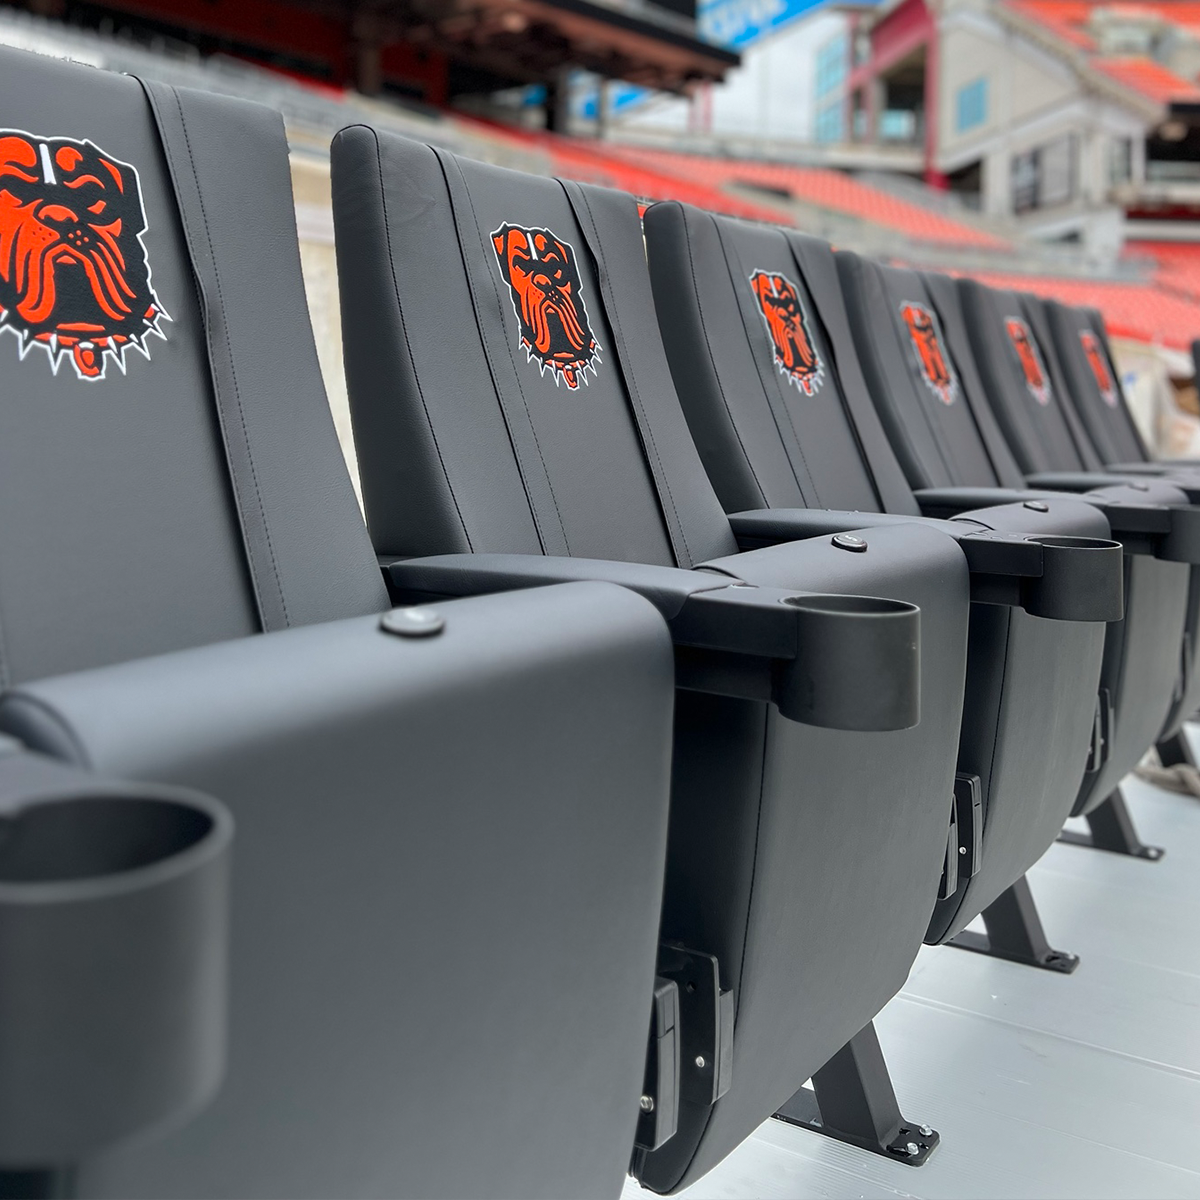 SuiteMax 3.5 VIP Seats with Major League Soccer Alternate Logo